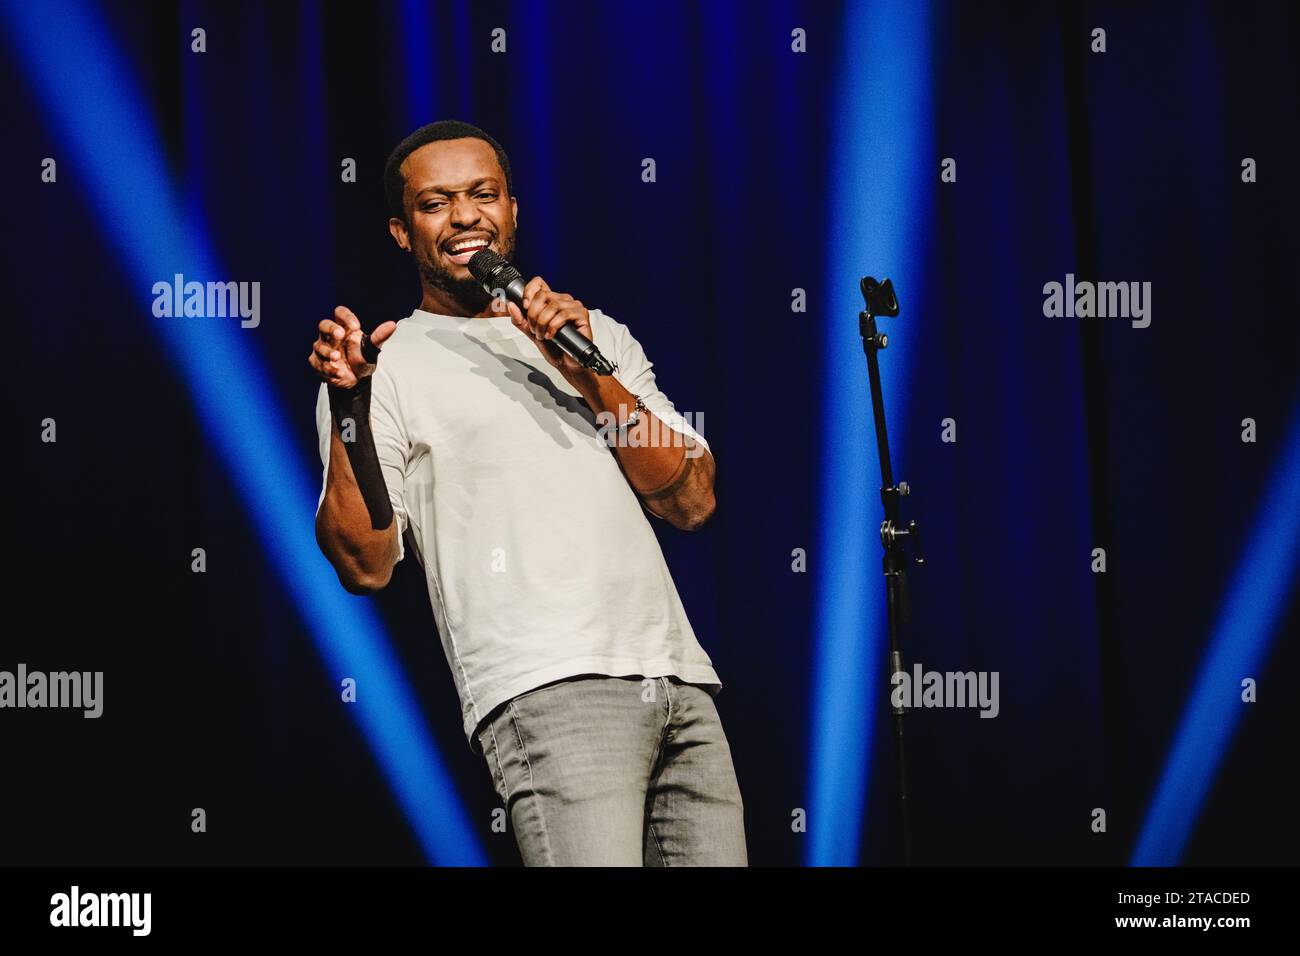 Bern, Switzerland. 29th Nov, 2023. The Swiss comedian Charles Nguela performs his stand-up comedy show R.E.S.P.E.C.T. at Bierhübeli in Bern. (Photo Credit: Gonzales Photo/Alamy Live News Stock Photo